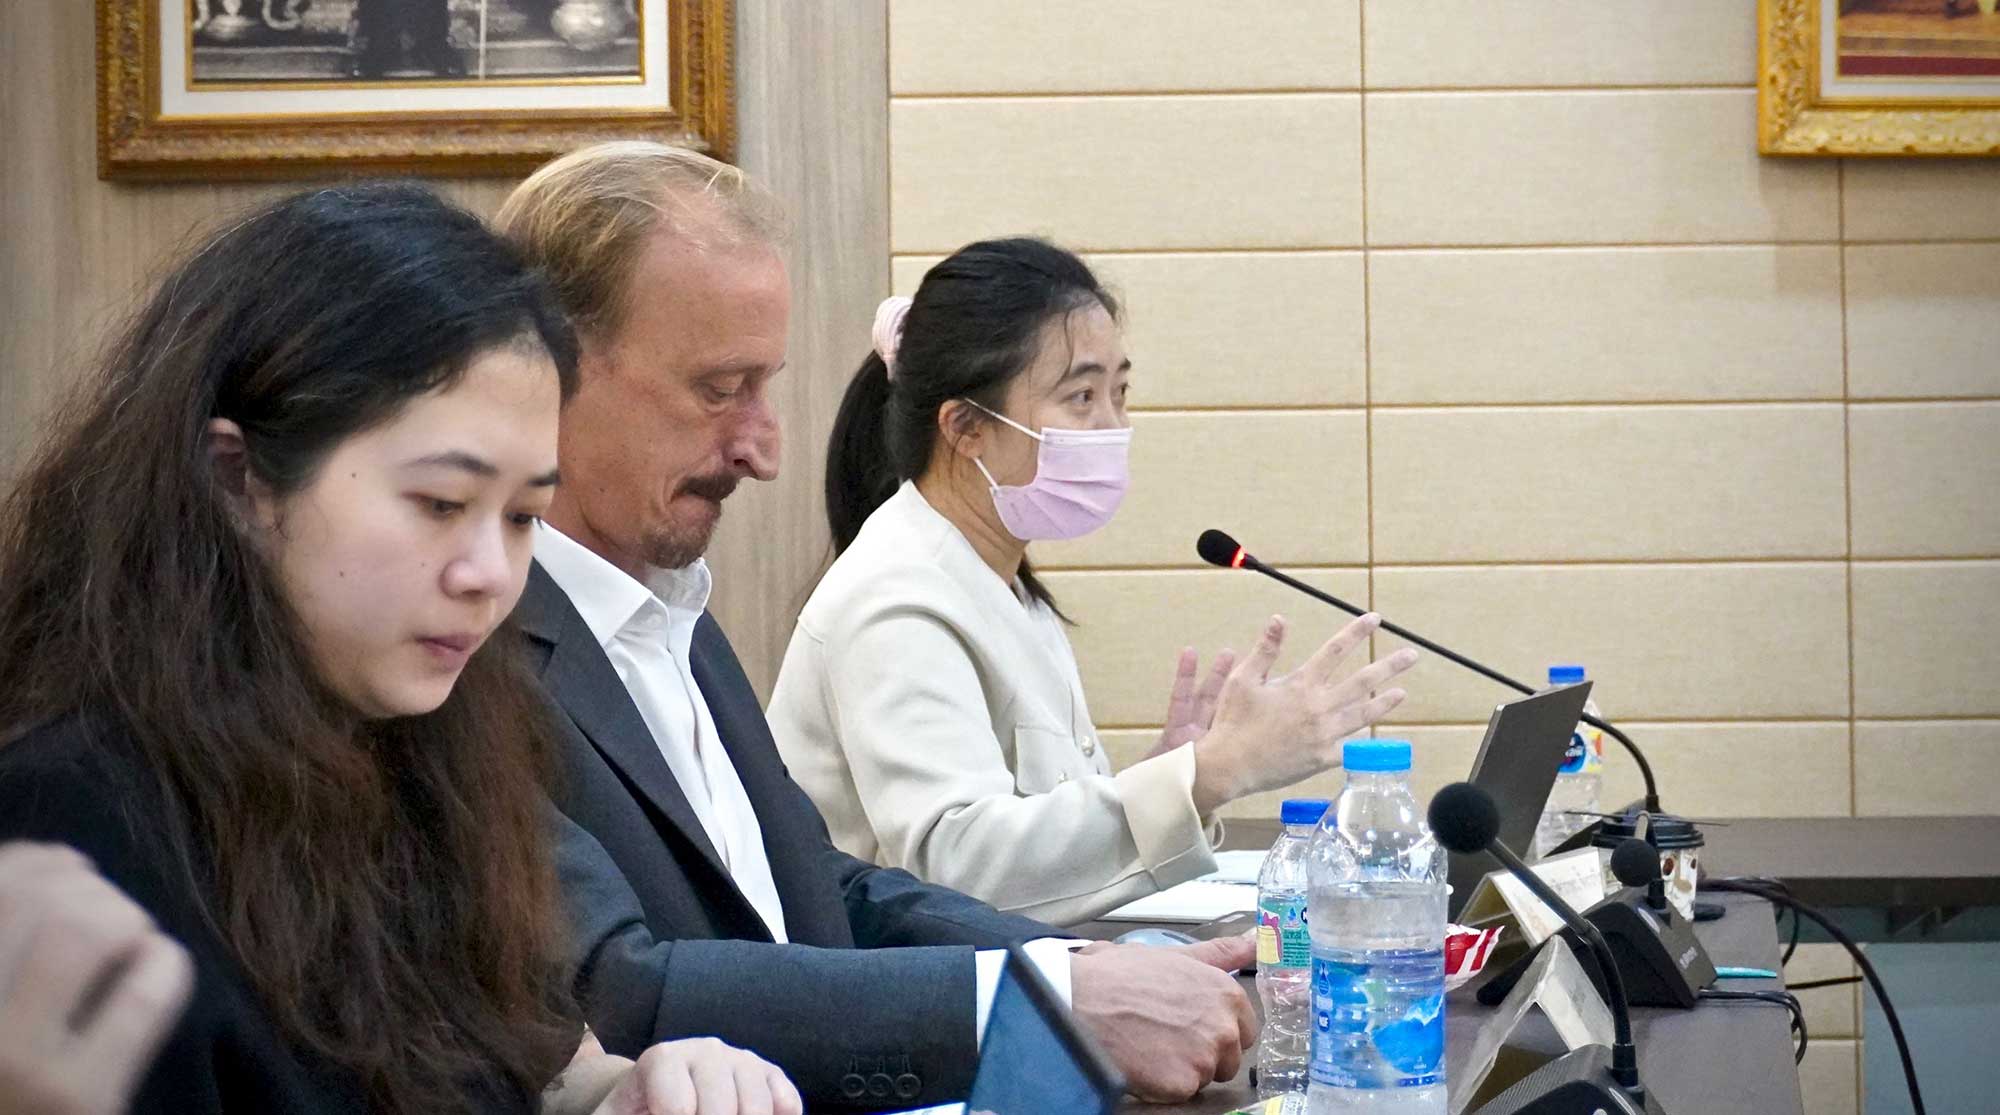 The meeting was attended by 31 representatives from GIZ, Department of Public Works and Town and Country Planning, Chulalongkorn University, and Thammasat University.